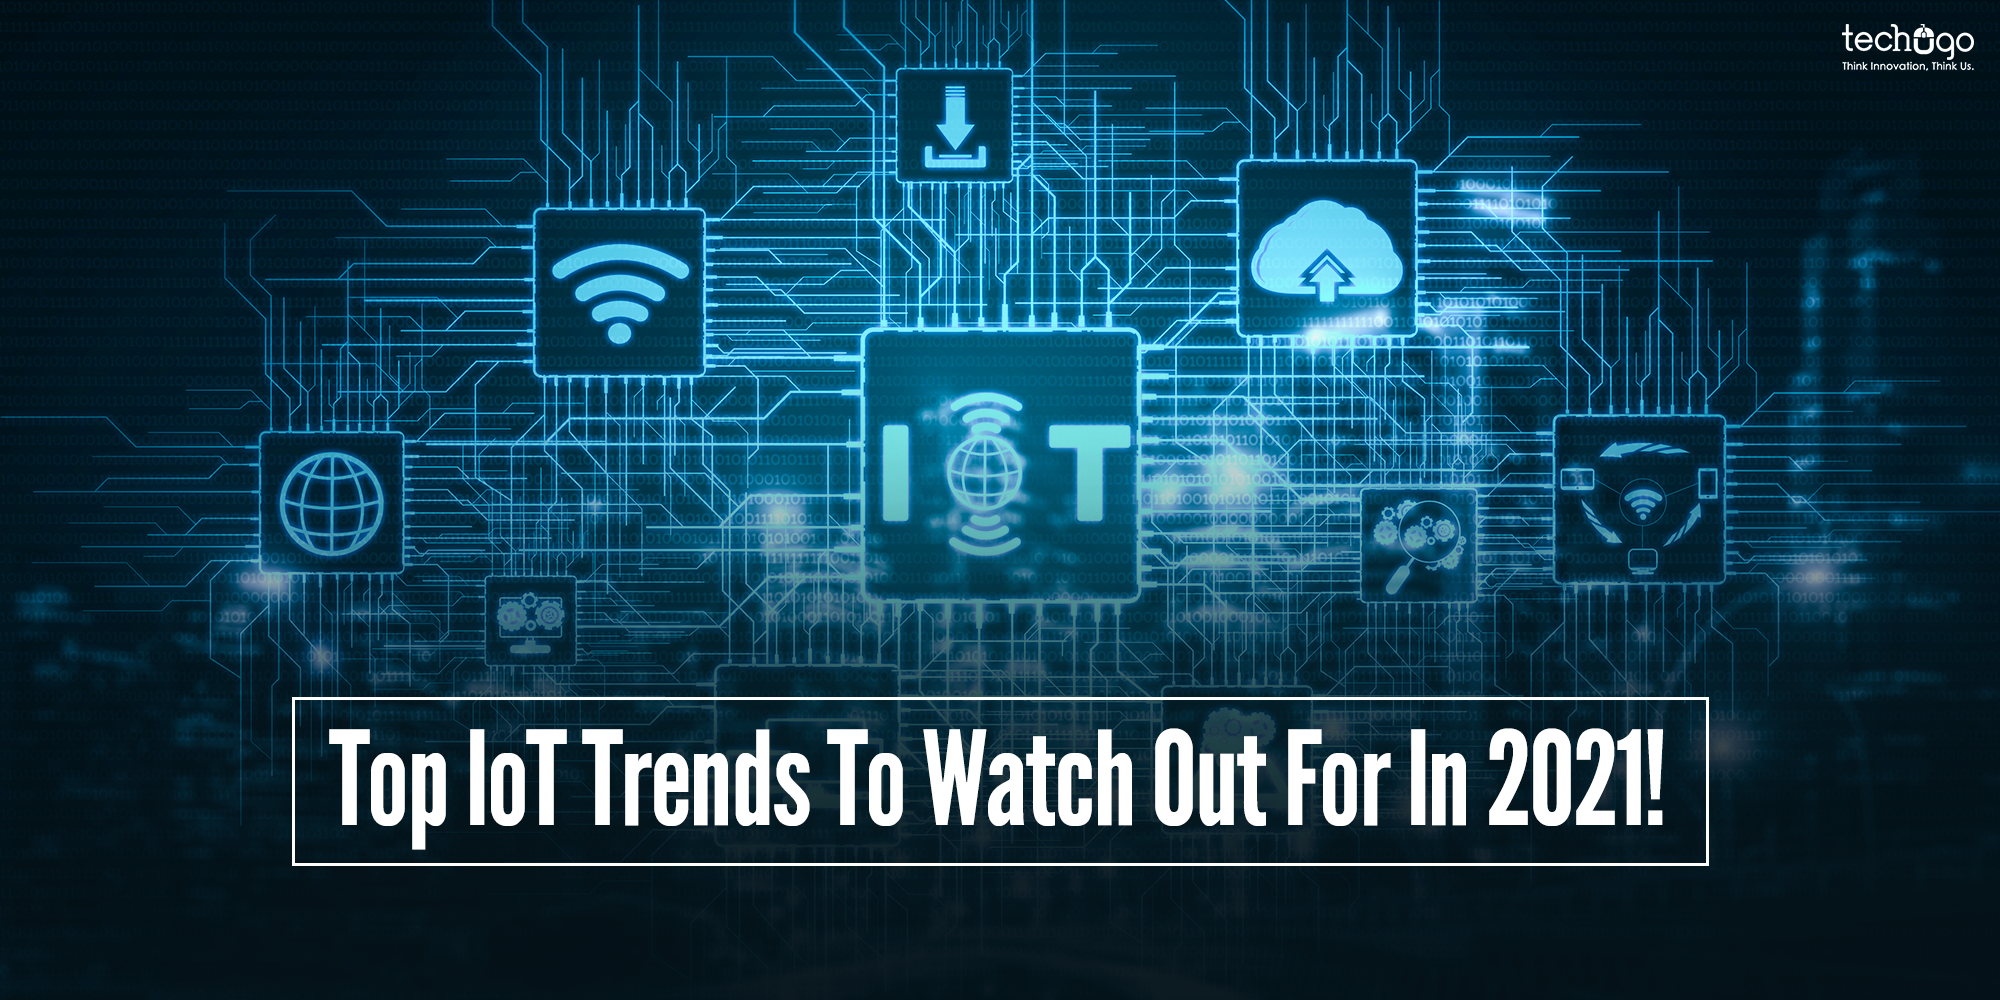 Top IoT Trends To Watch Out For In 2021!